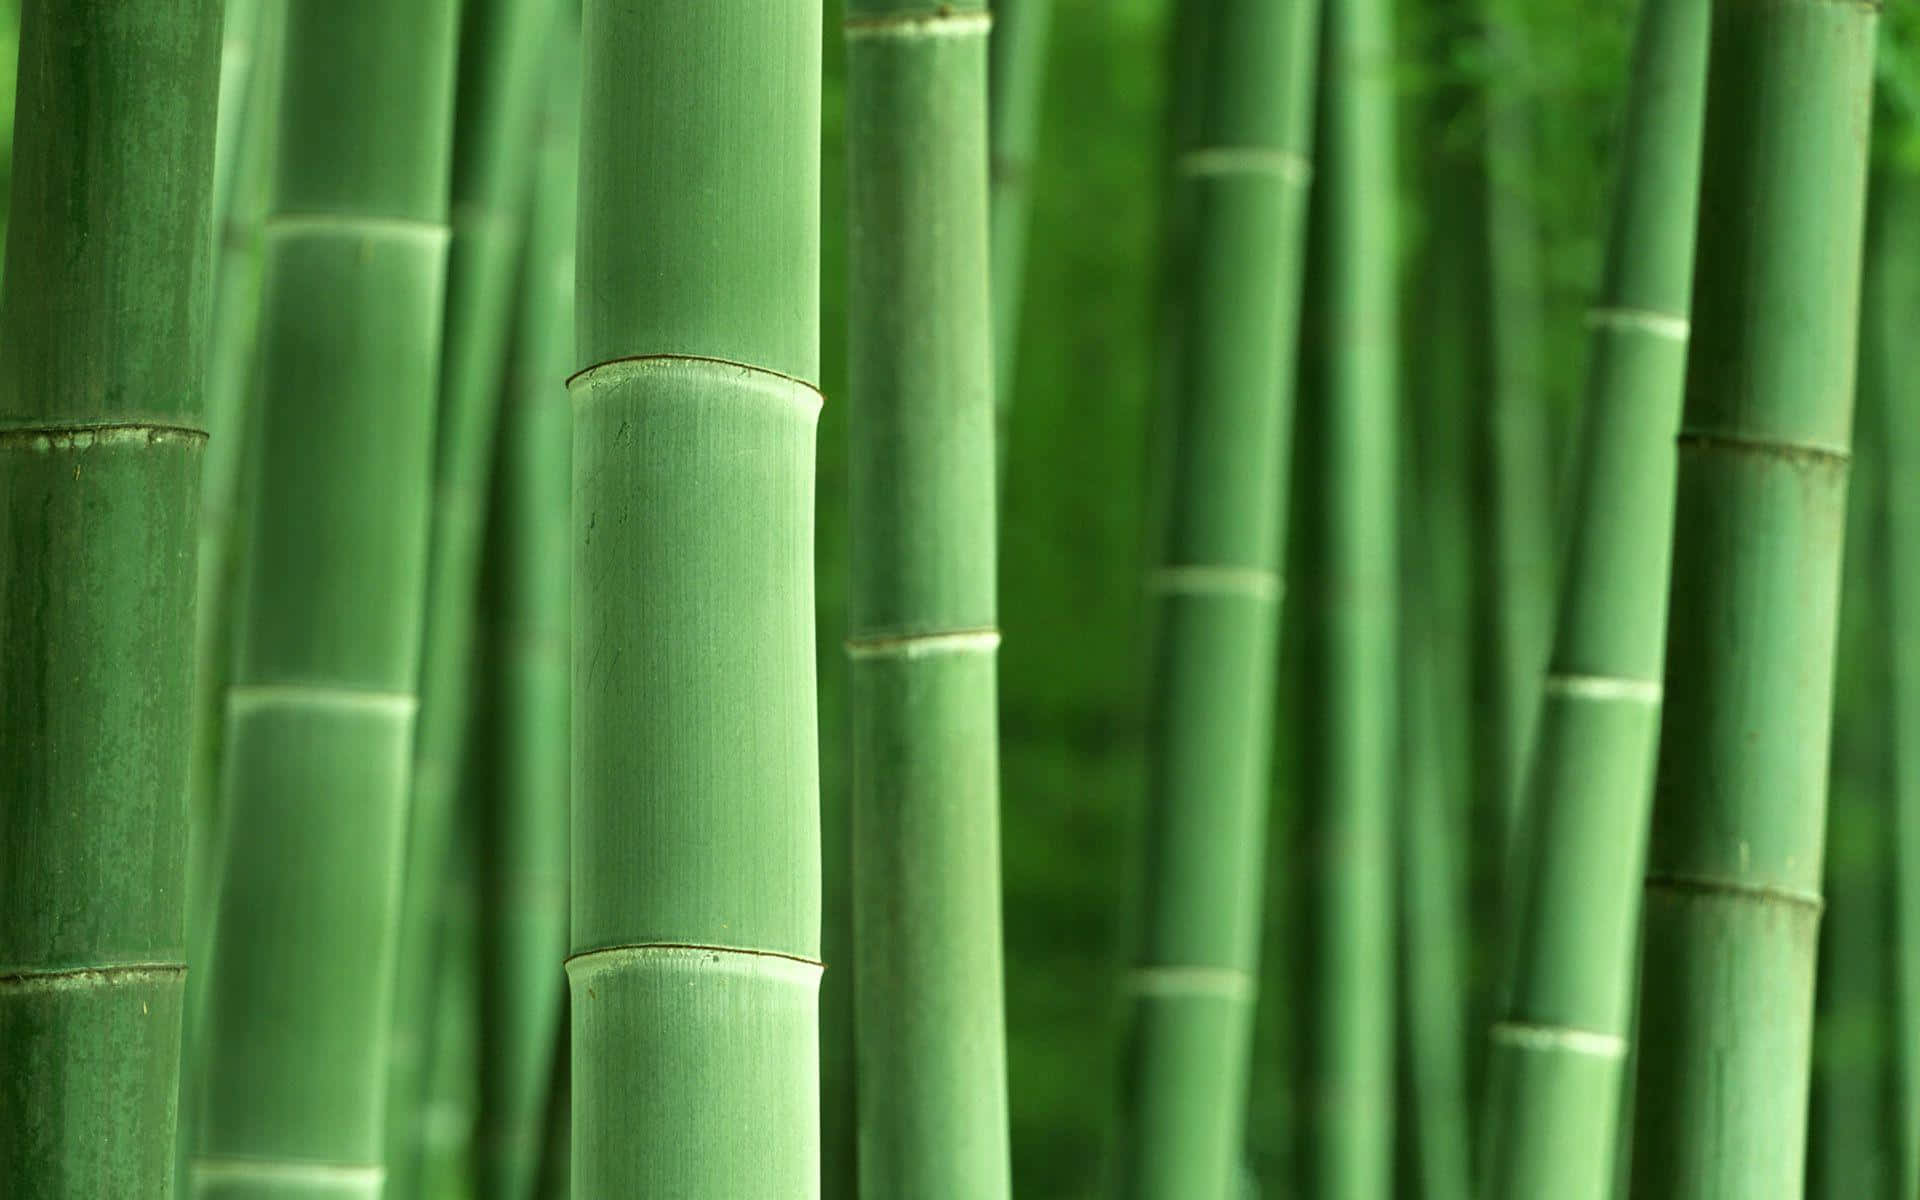 Bring Nature to Your Workspace with Bamboo Desktop Wallpaper